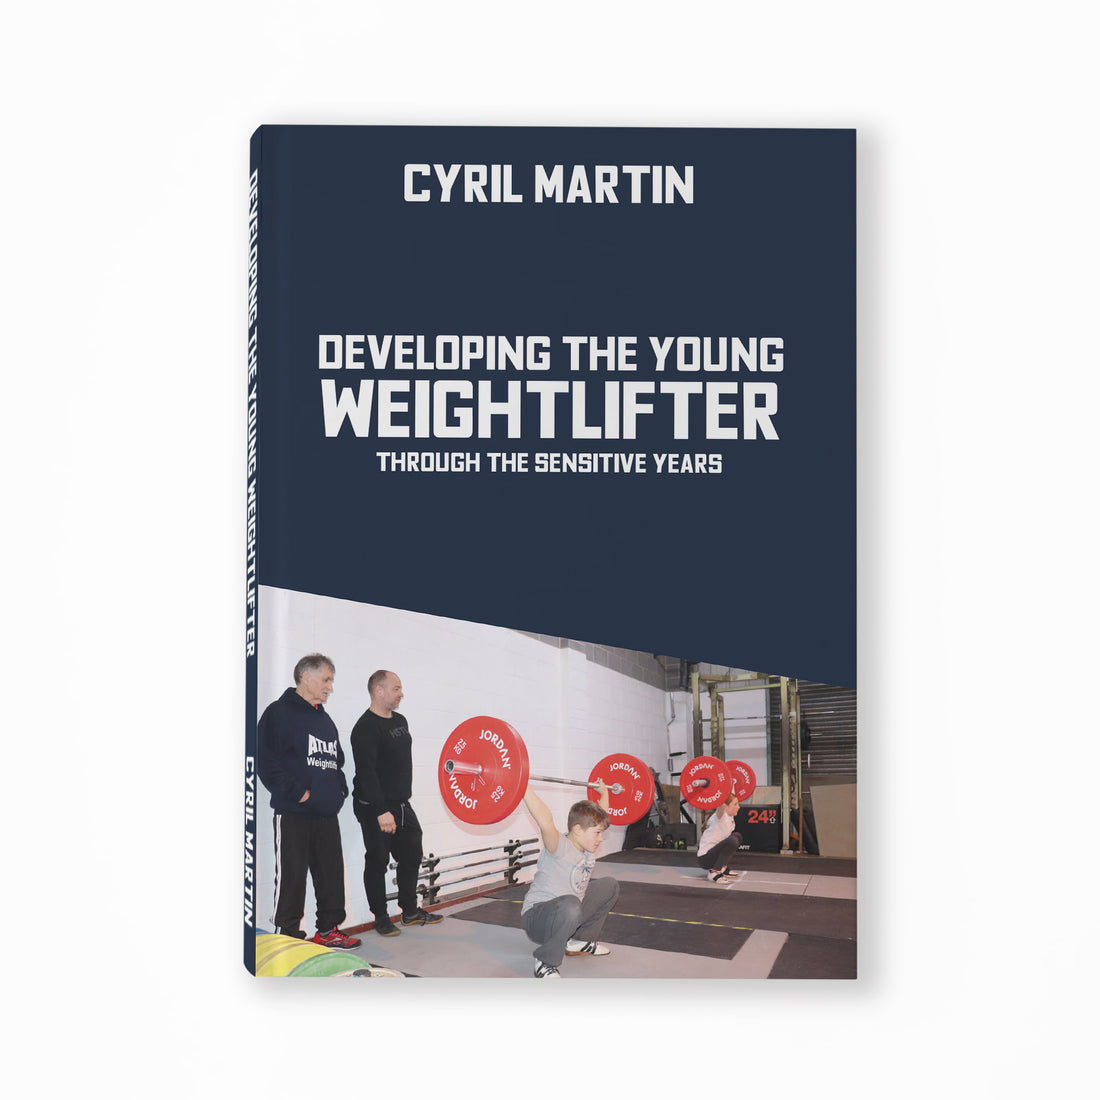 Developing the Young Weightlifter